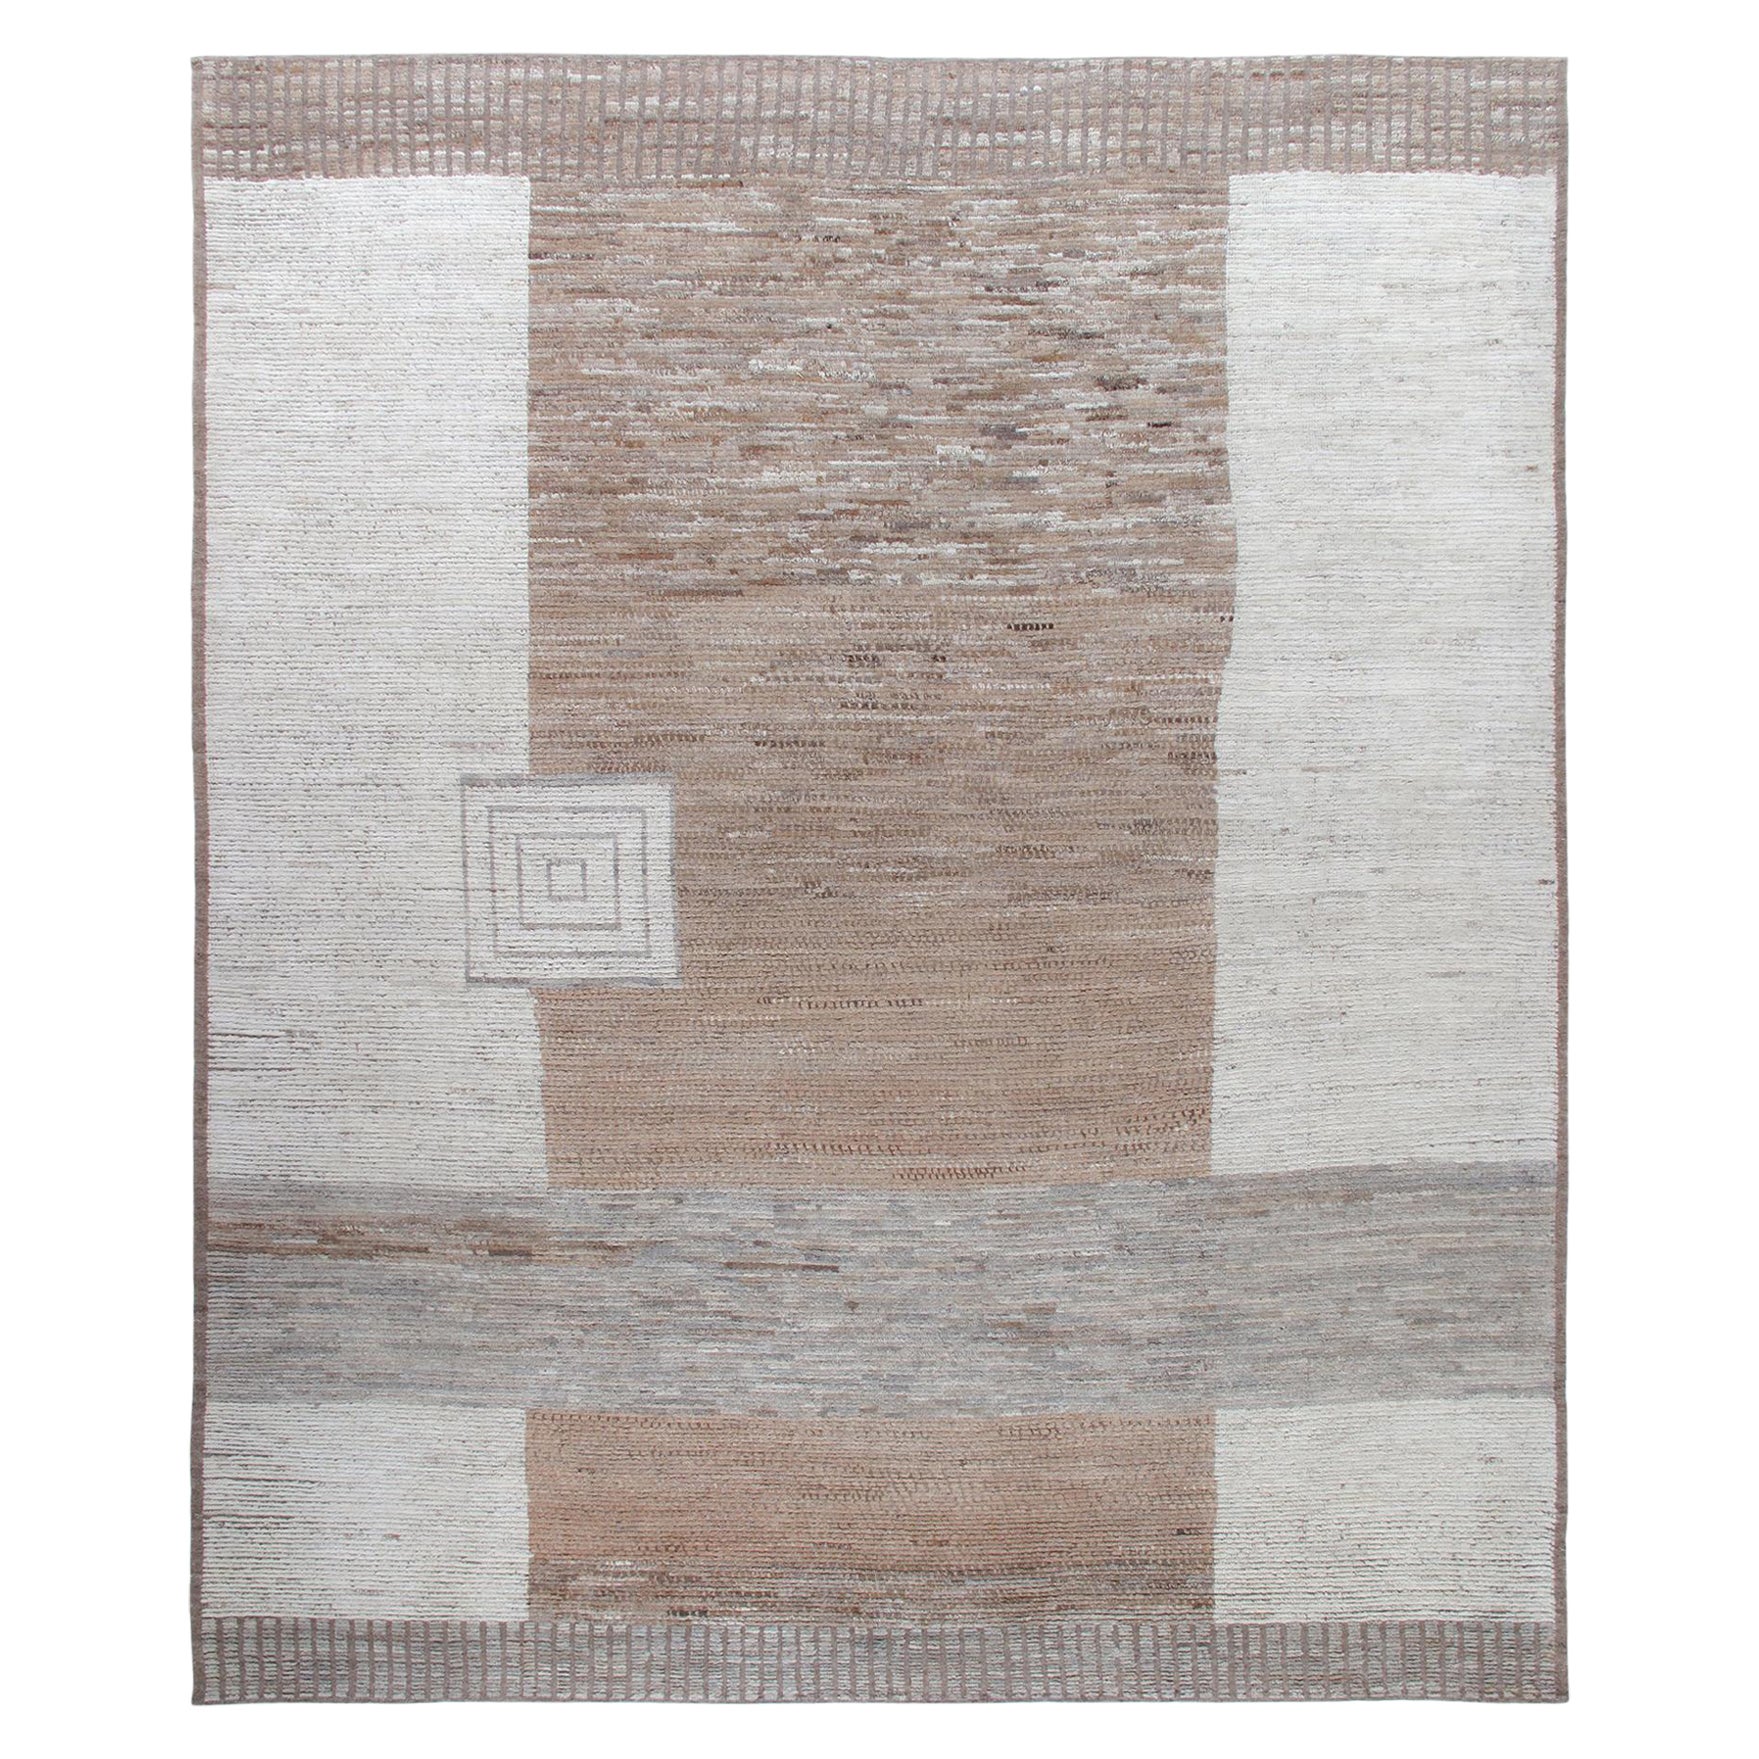 Modern Minimalist Mid-Century Style Wool Rug in Beige, Copper, and Grey Tones For Sale